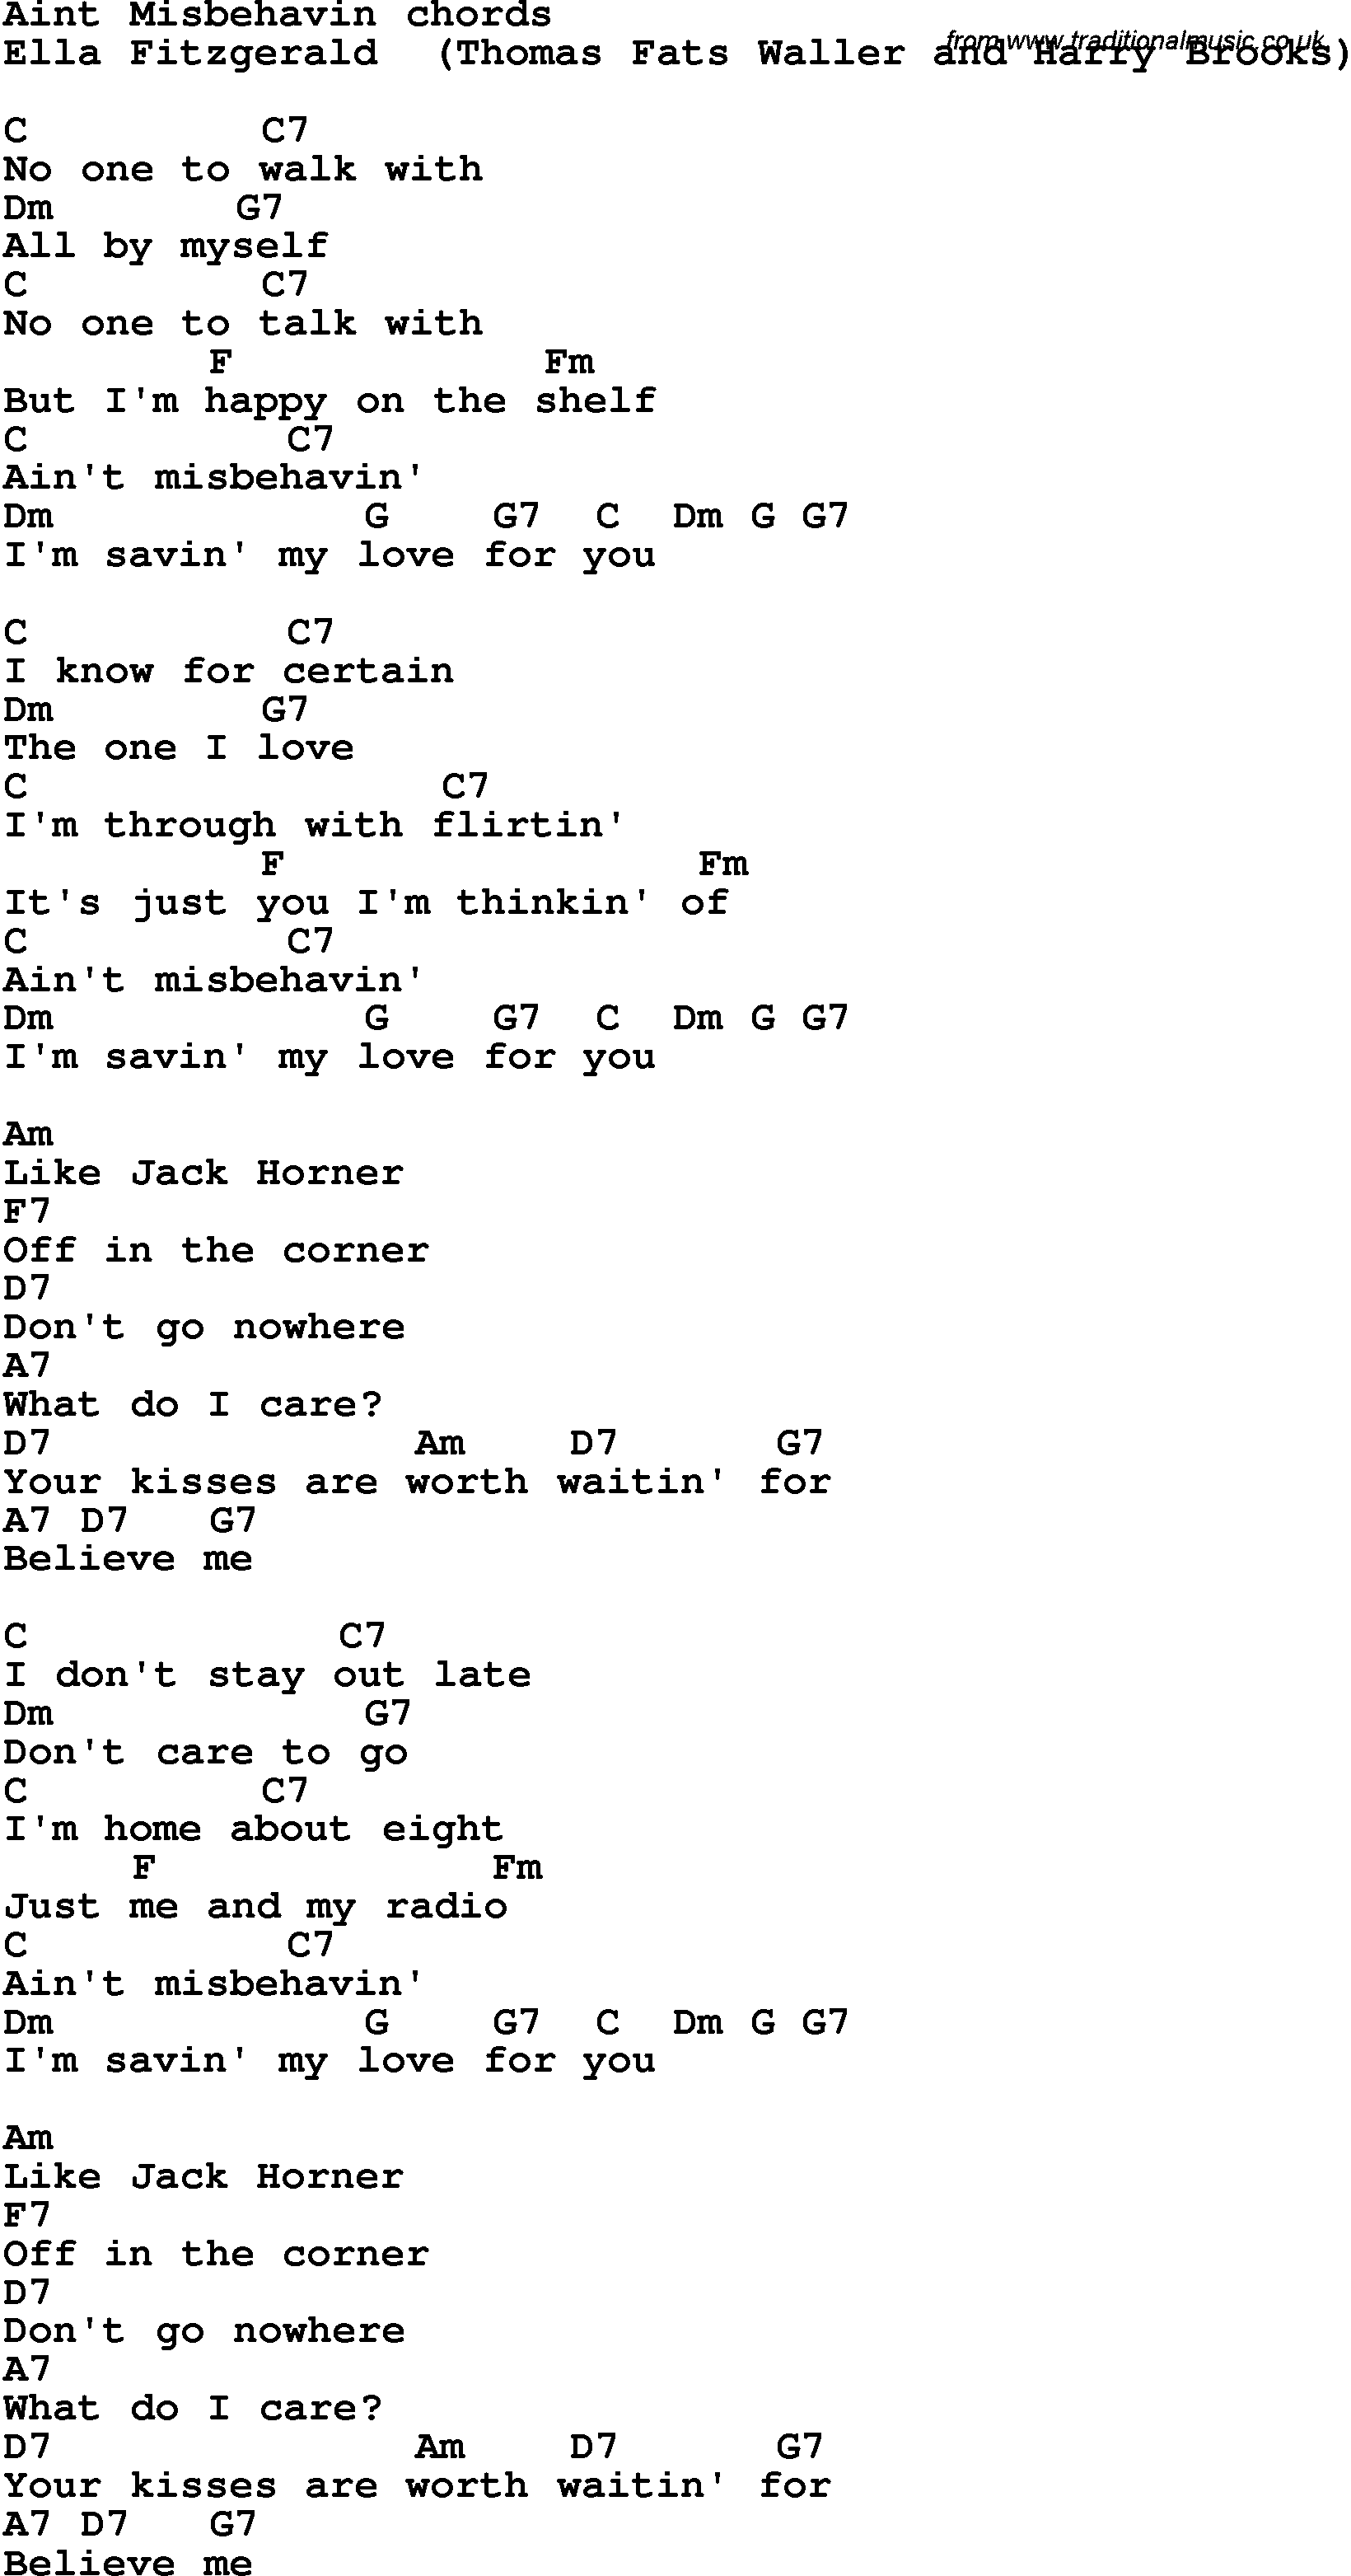 Song Lyrics with guitar chords for Ain't Misbehavin - Ella Fitzgerald